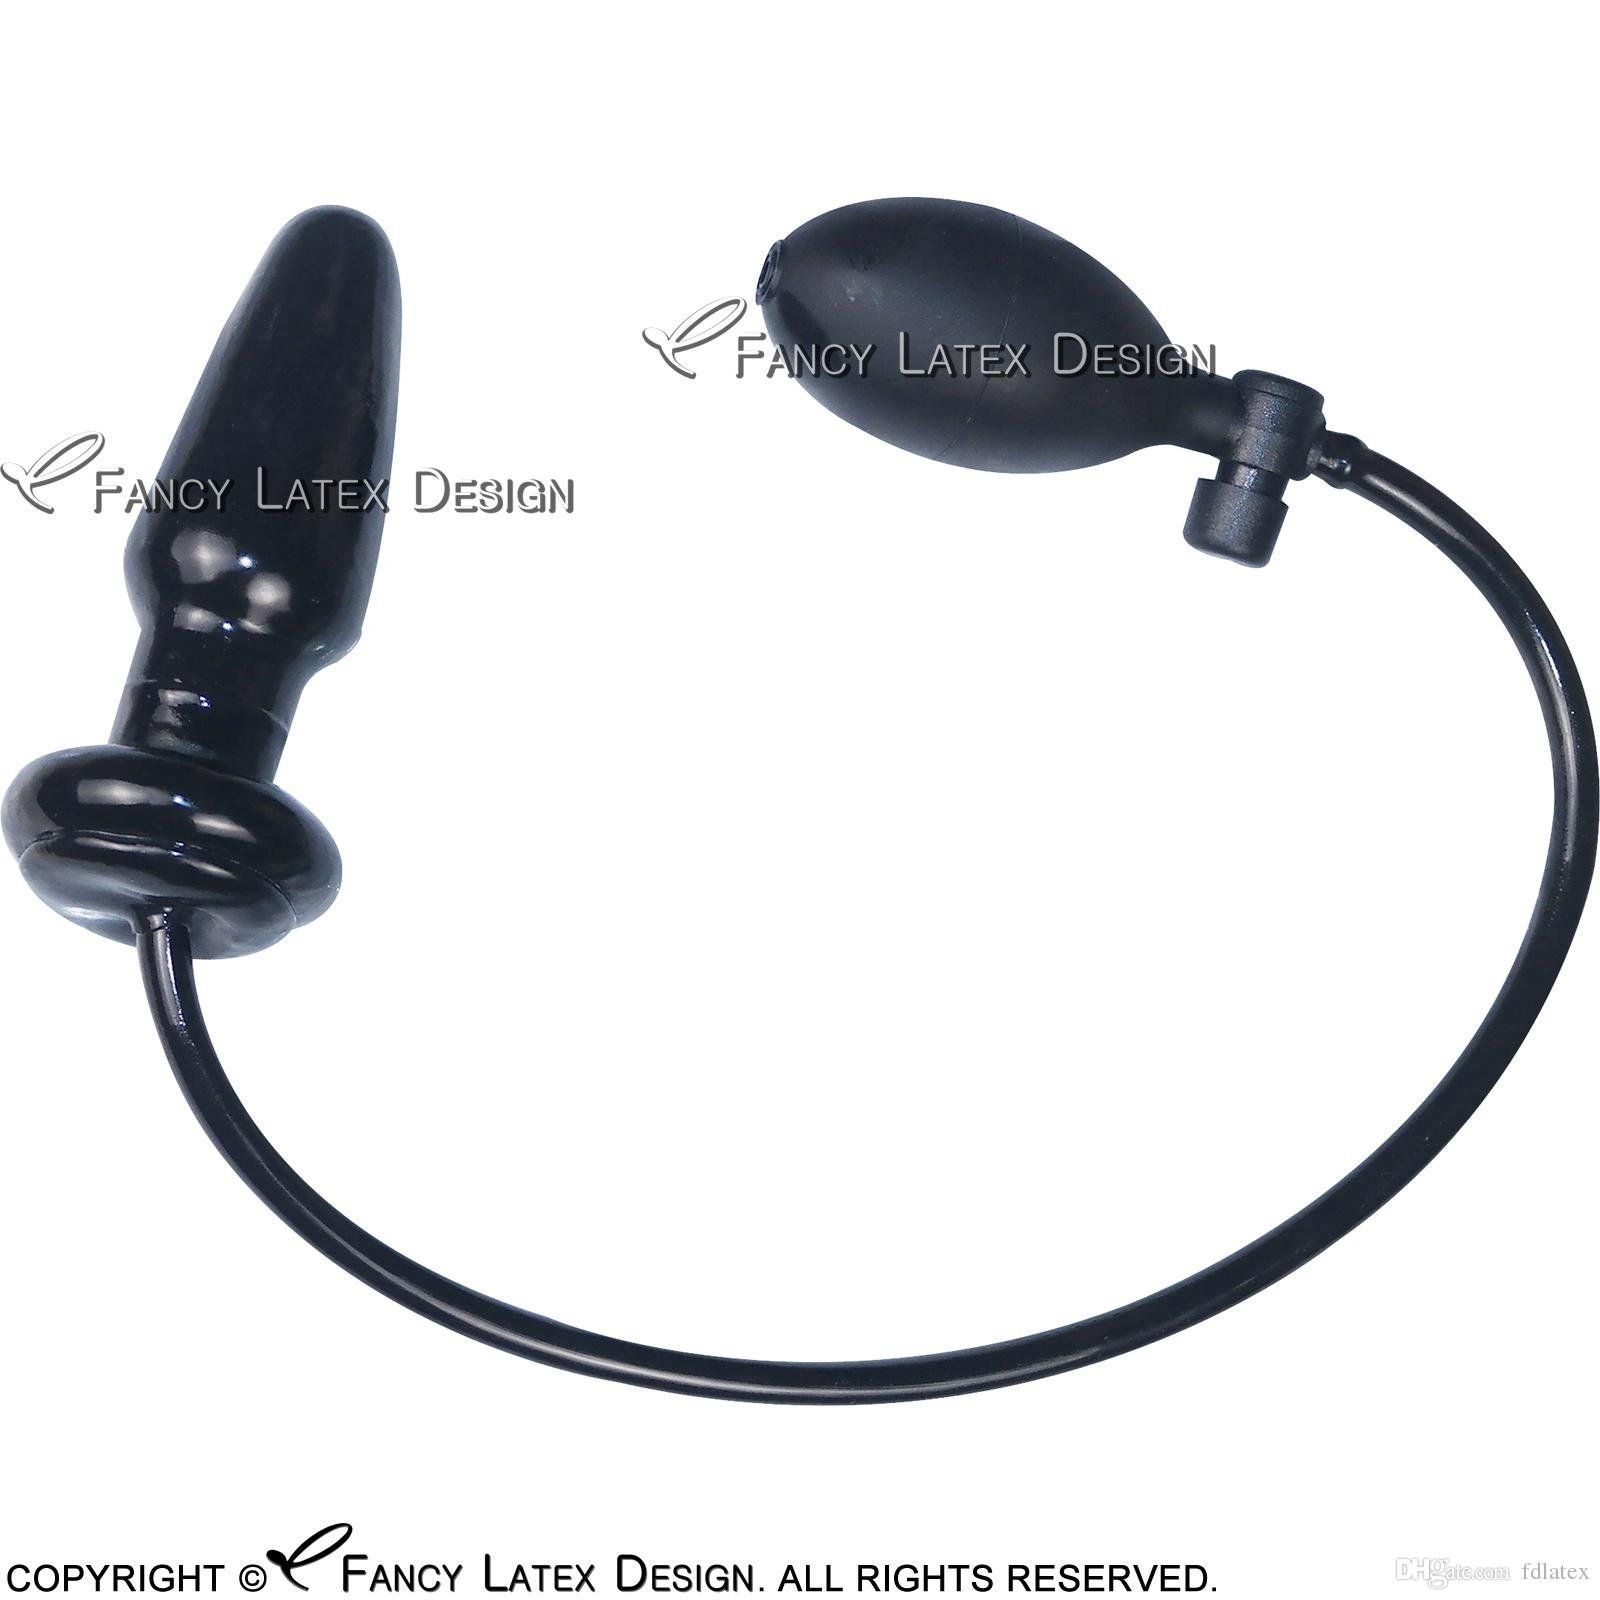 Rubber sex toys butt plugs